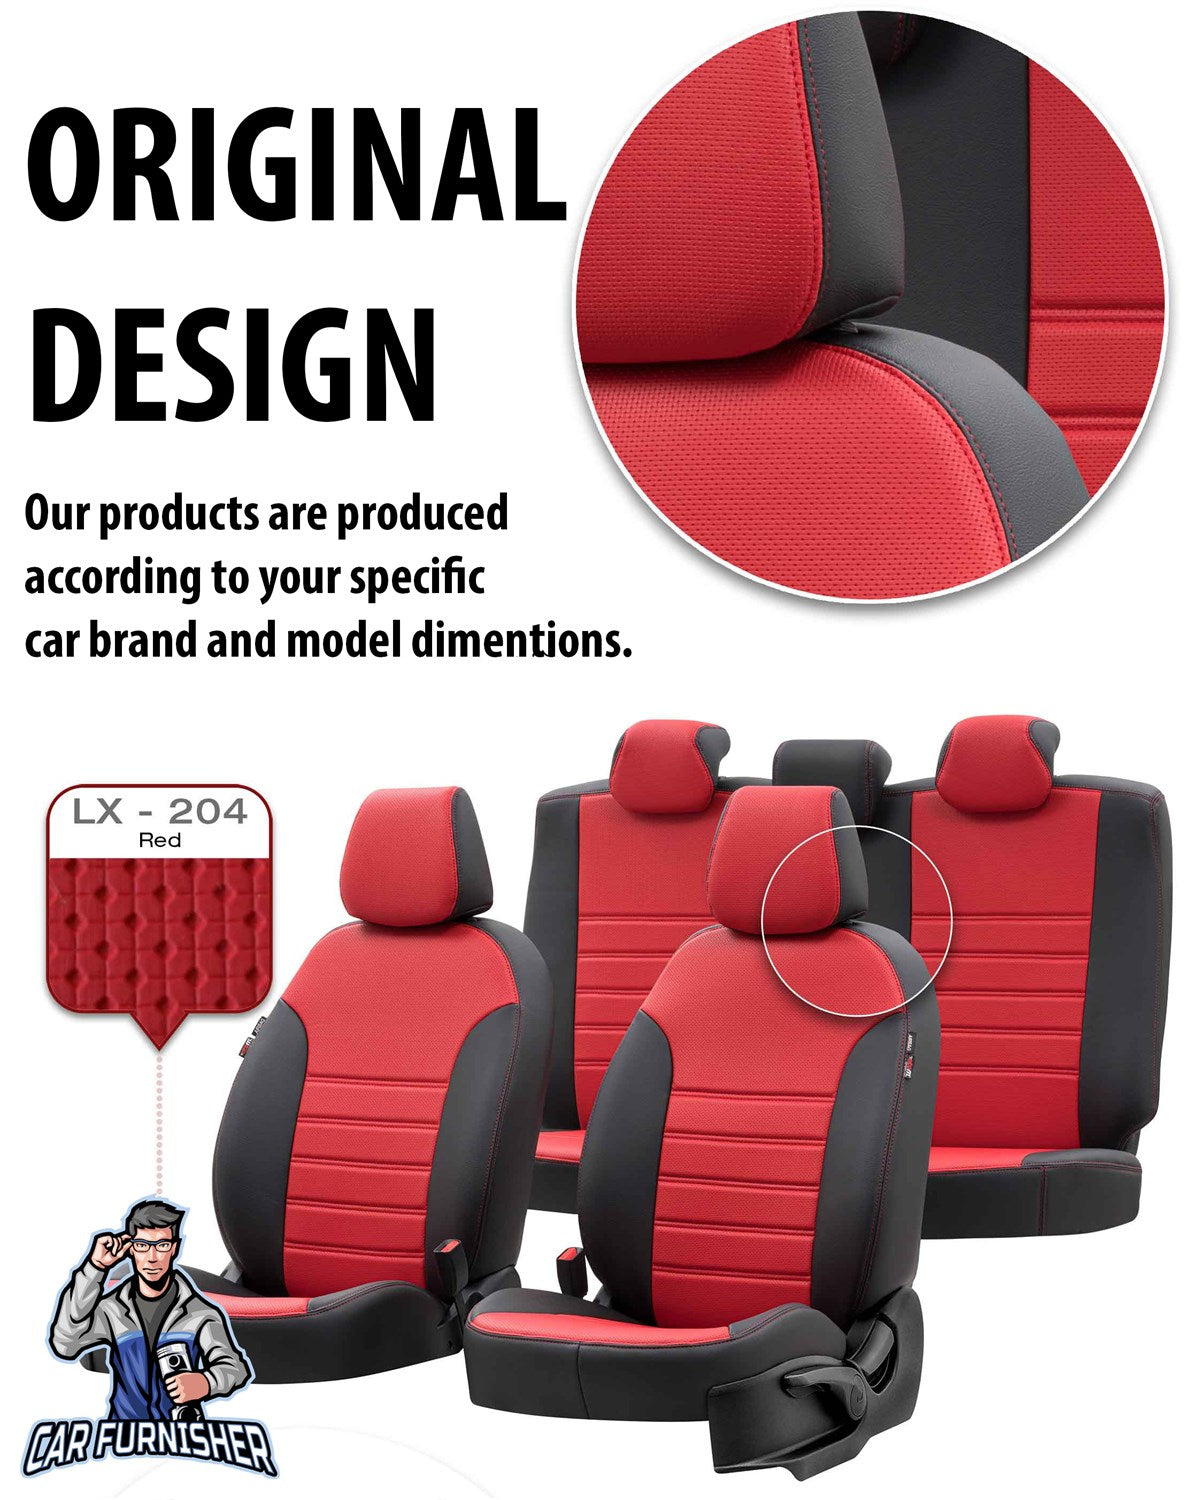 Volkswagen Amarok Seat Cover New York Leather Design Smoked Black Leather